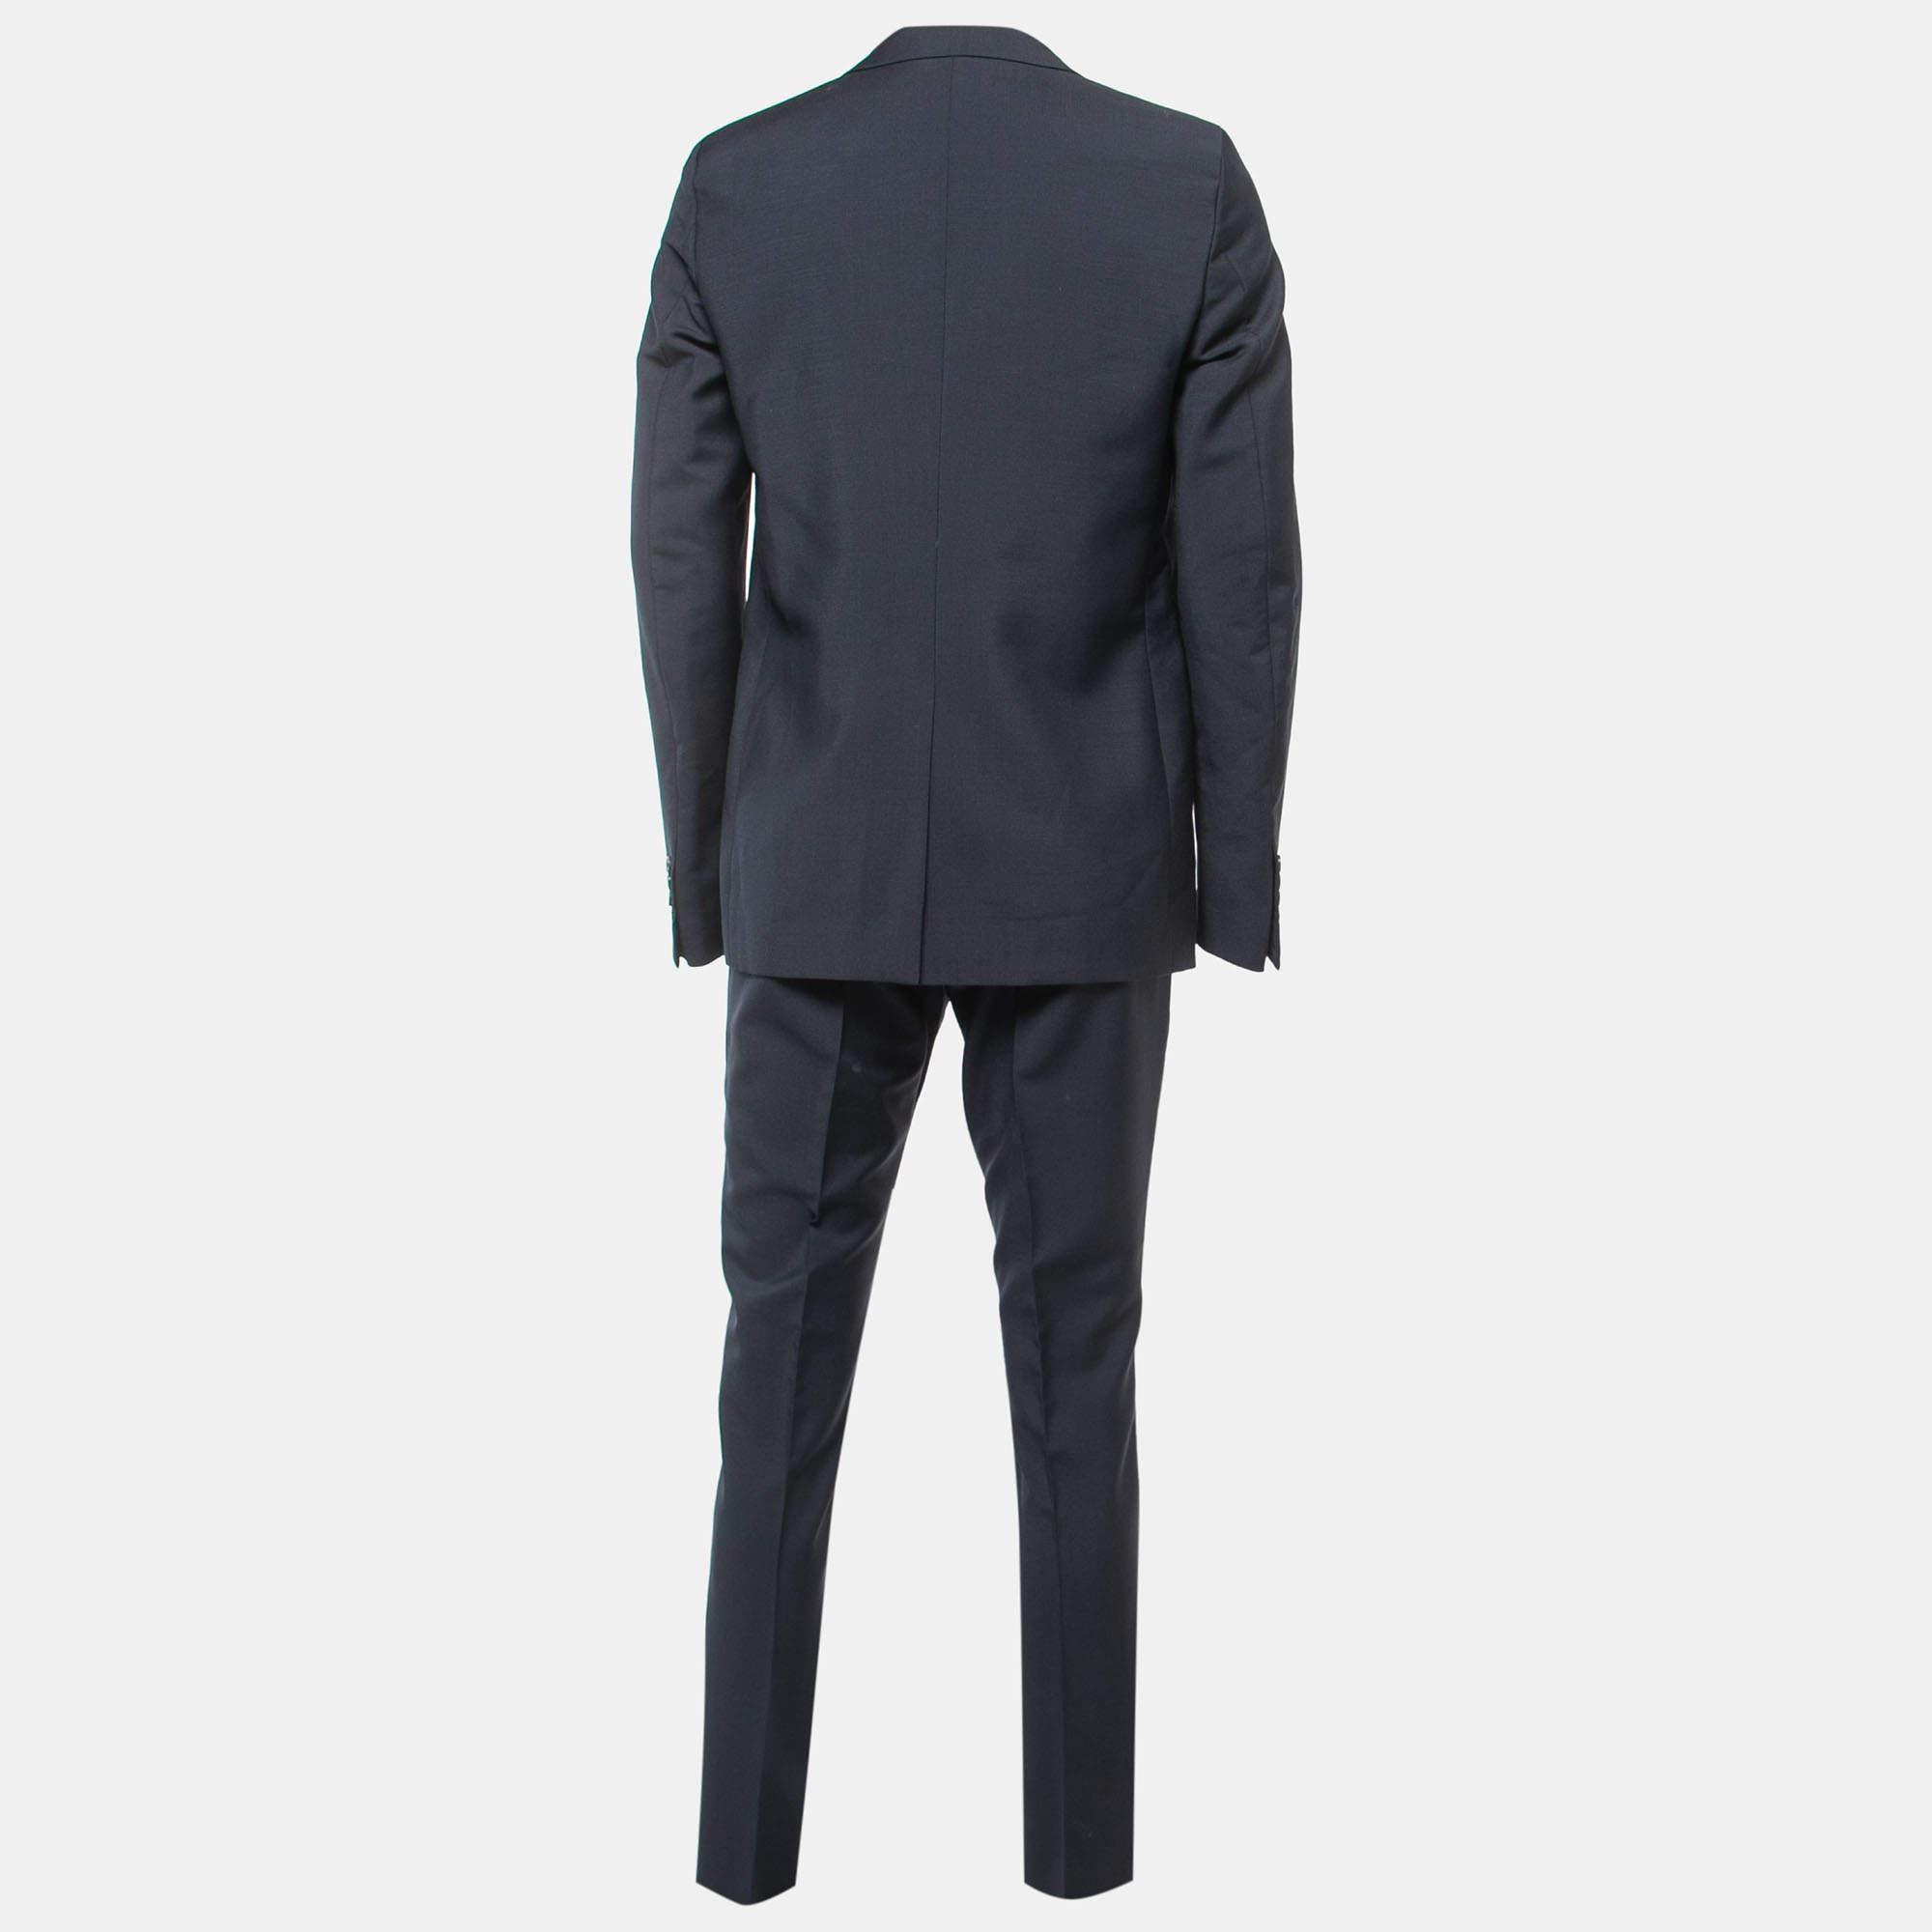 Characterized by impeccable tailoring, a good fit, and the use of quality materials, this Prada suit set will help you serve dapper looks. Style it with oxfords or loafers to bring out the stylish appeal of the creation.

